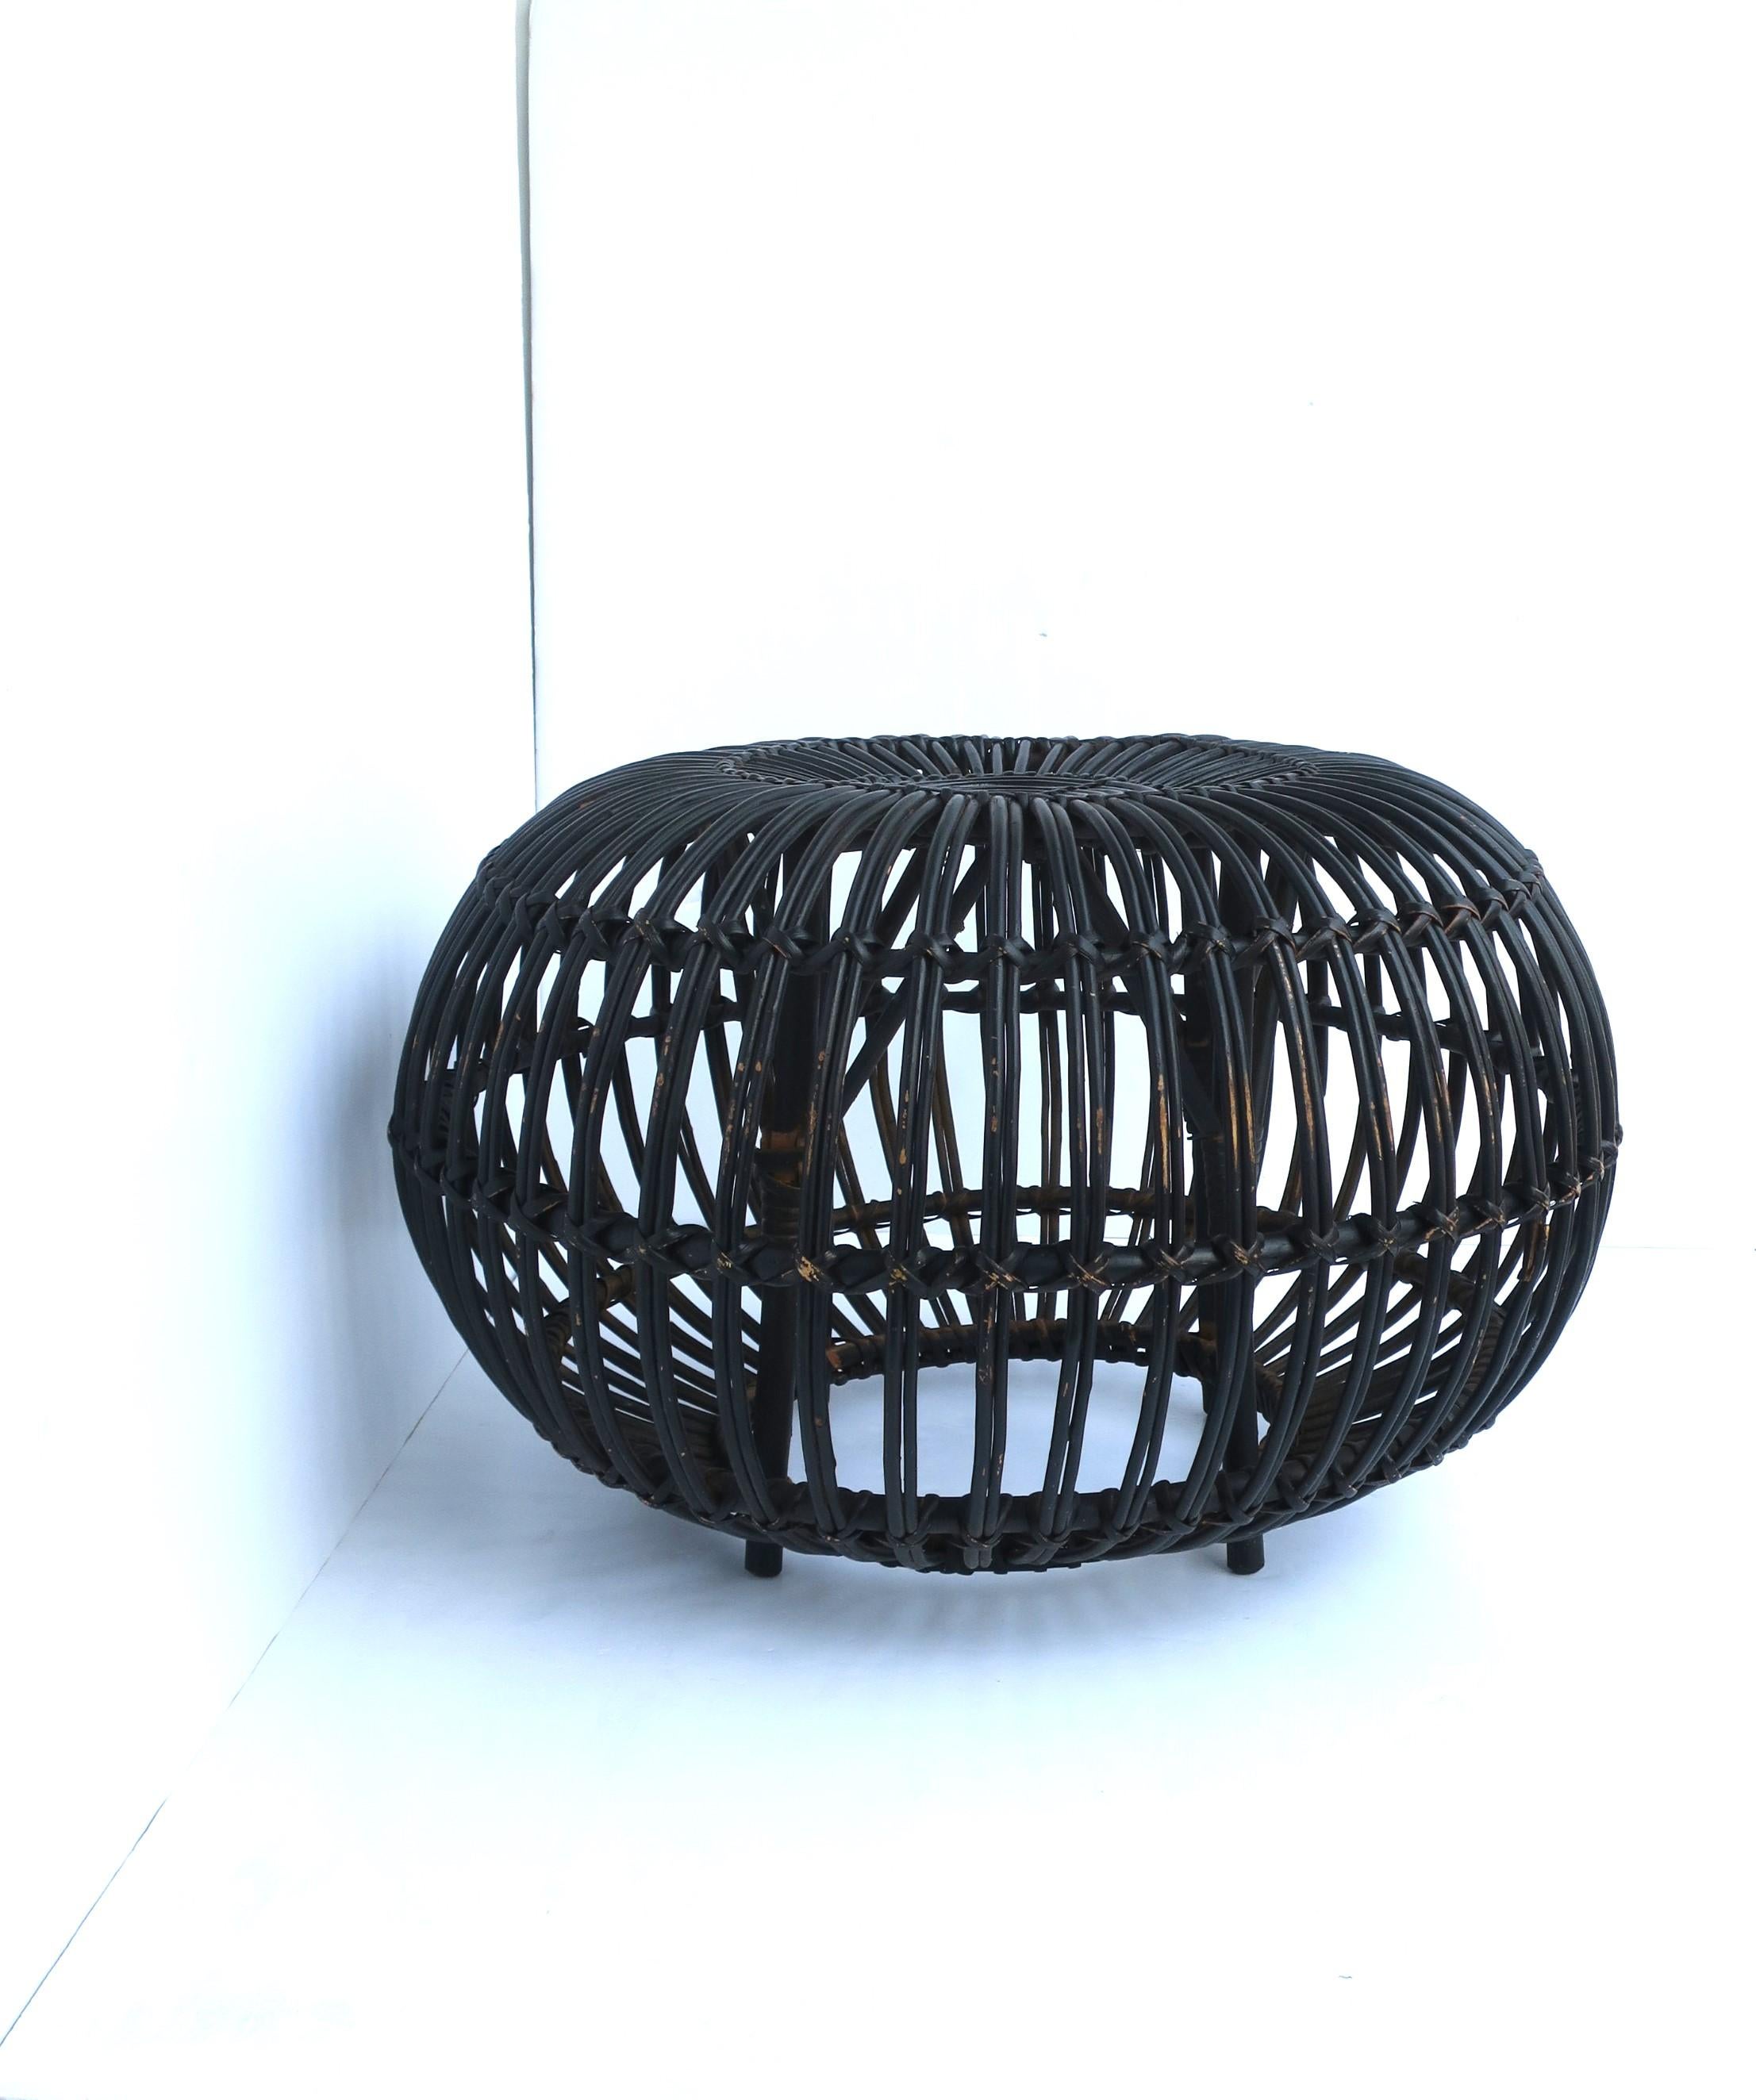 Painted  Black Wicker Rattan Ottoman Pouf Attributed to Franco Albini  For Sale